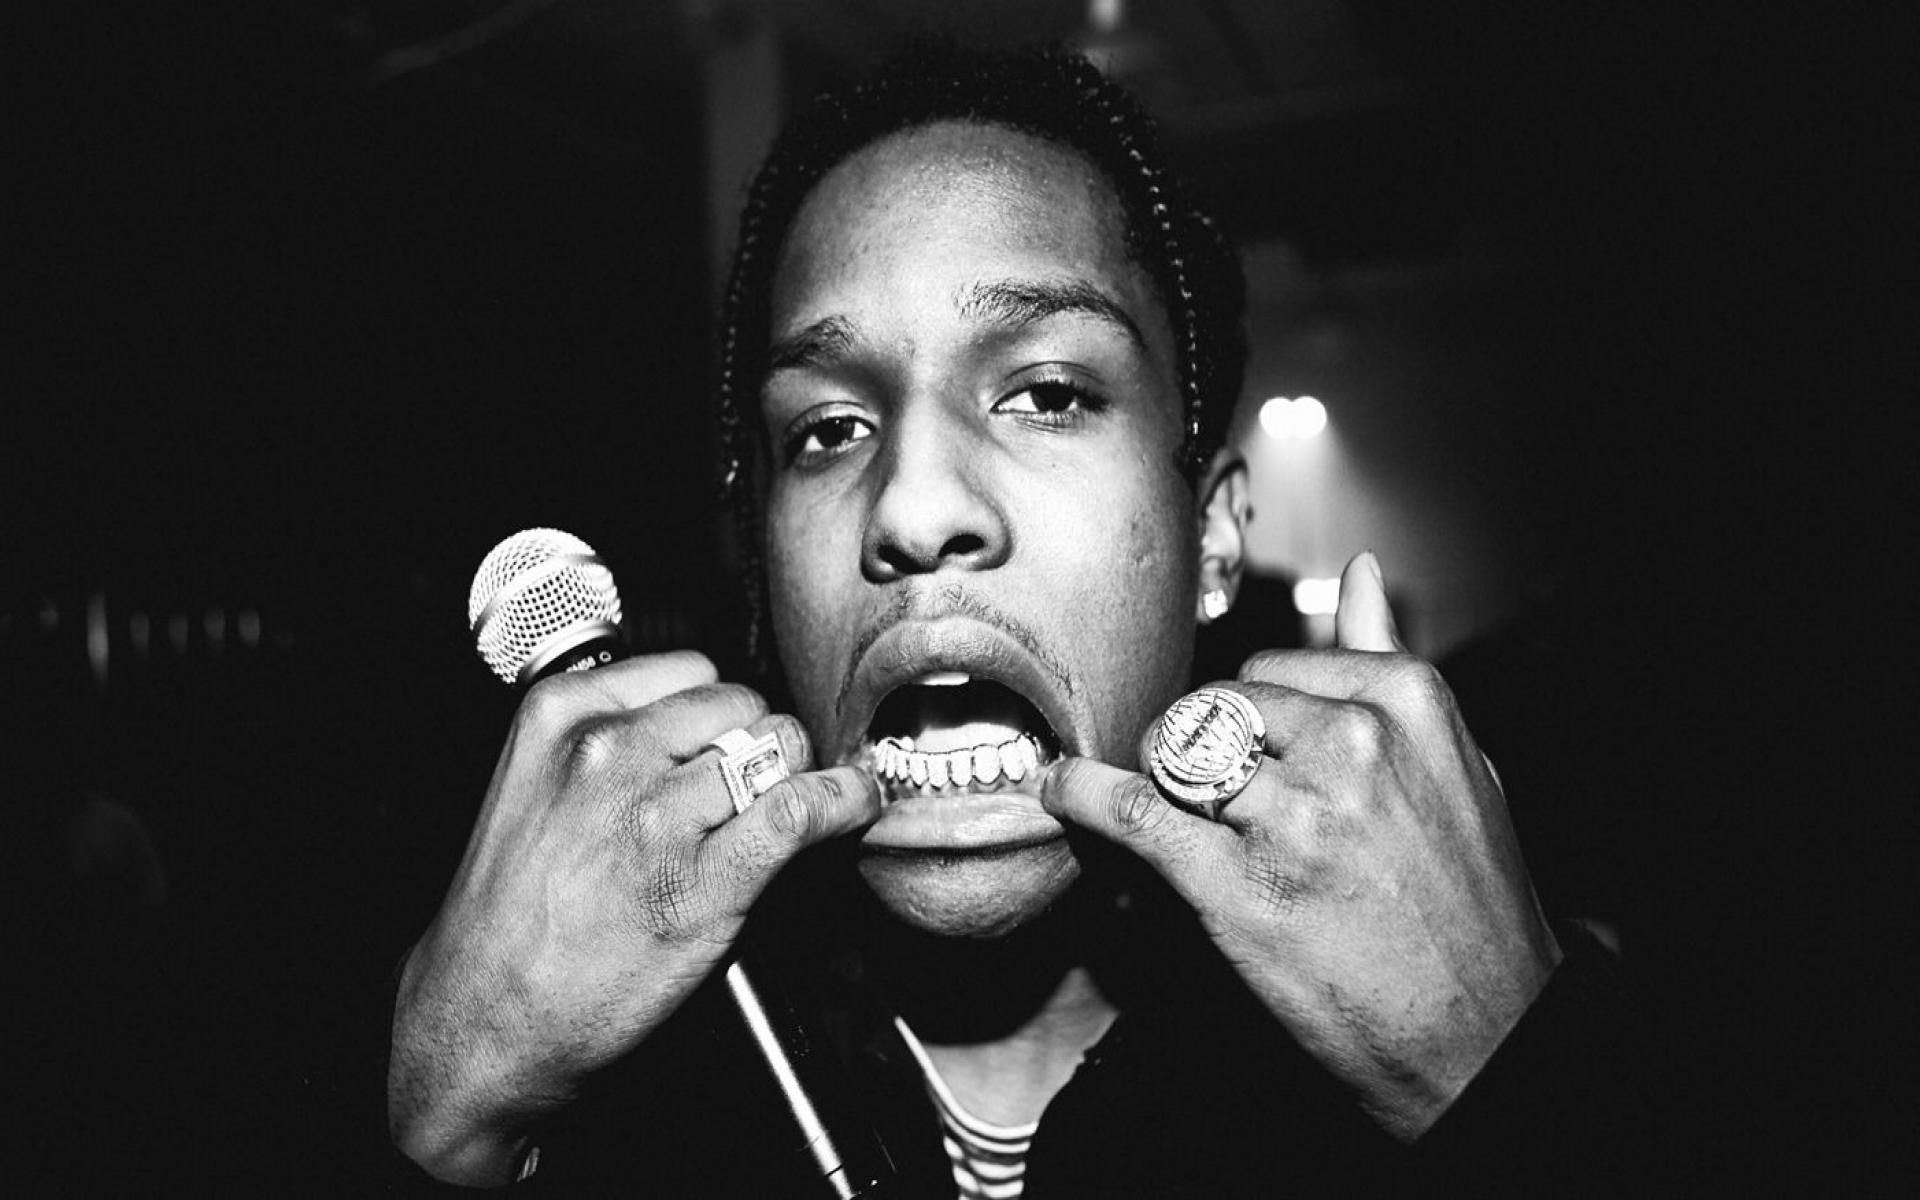 1920x1200 Asap Rocky Wallpaper Hd , (43+) image collections of wallpapers